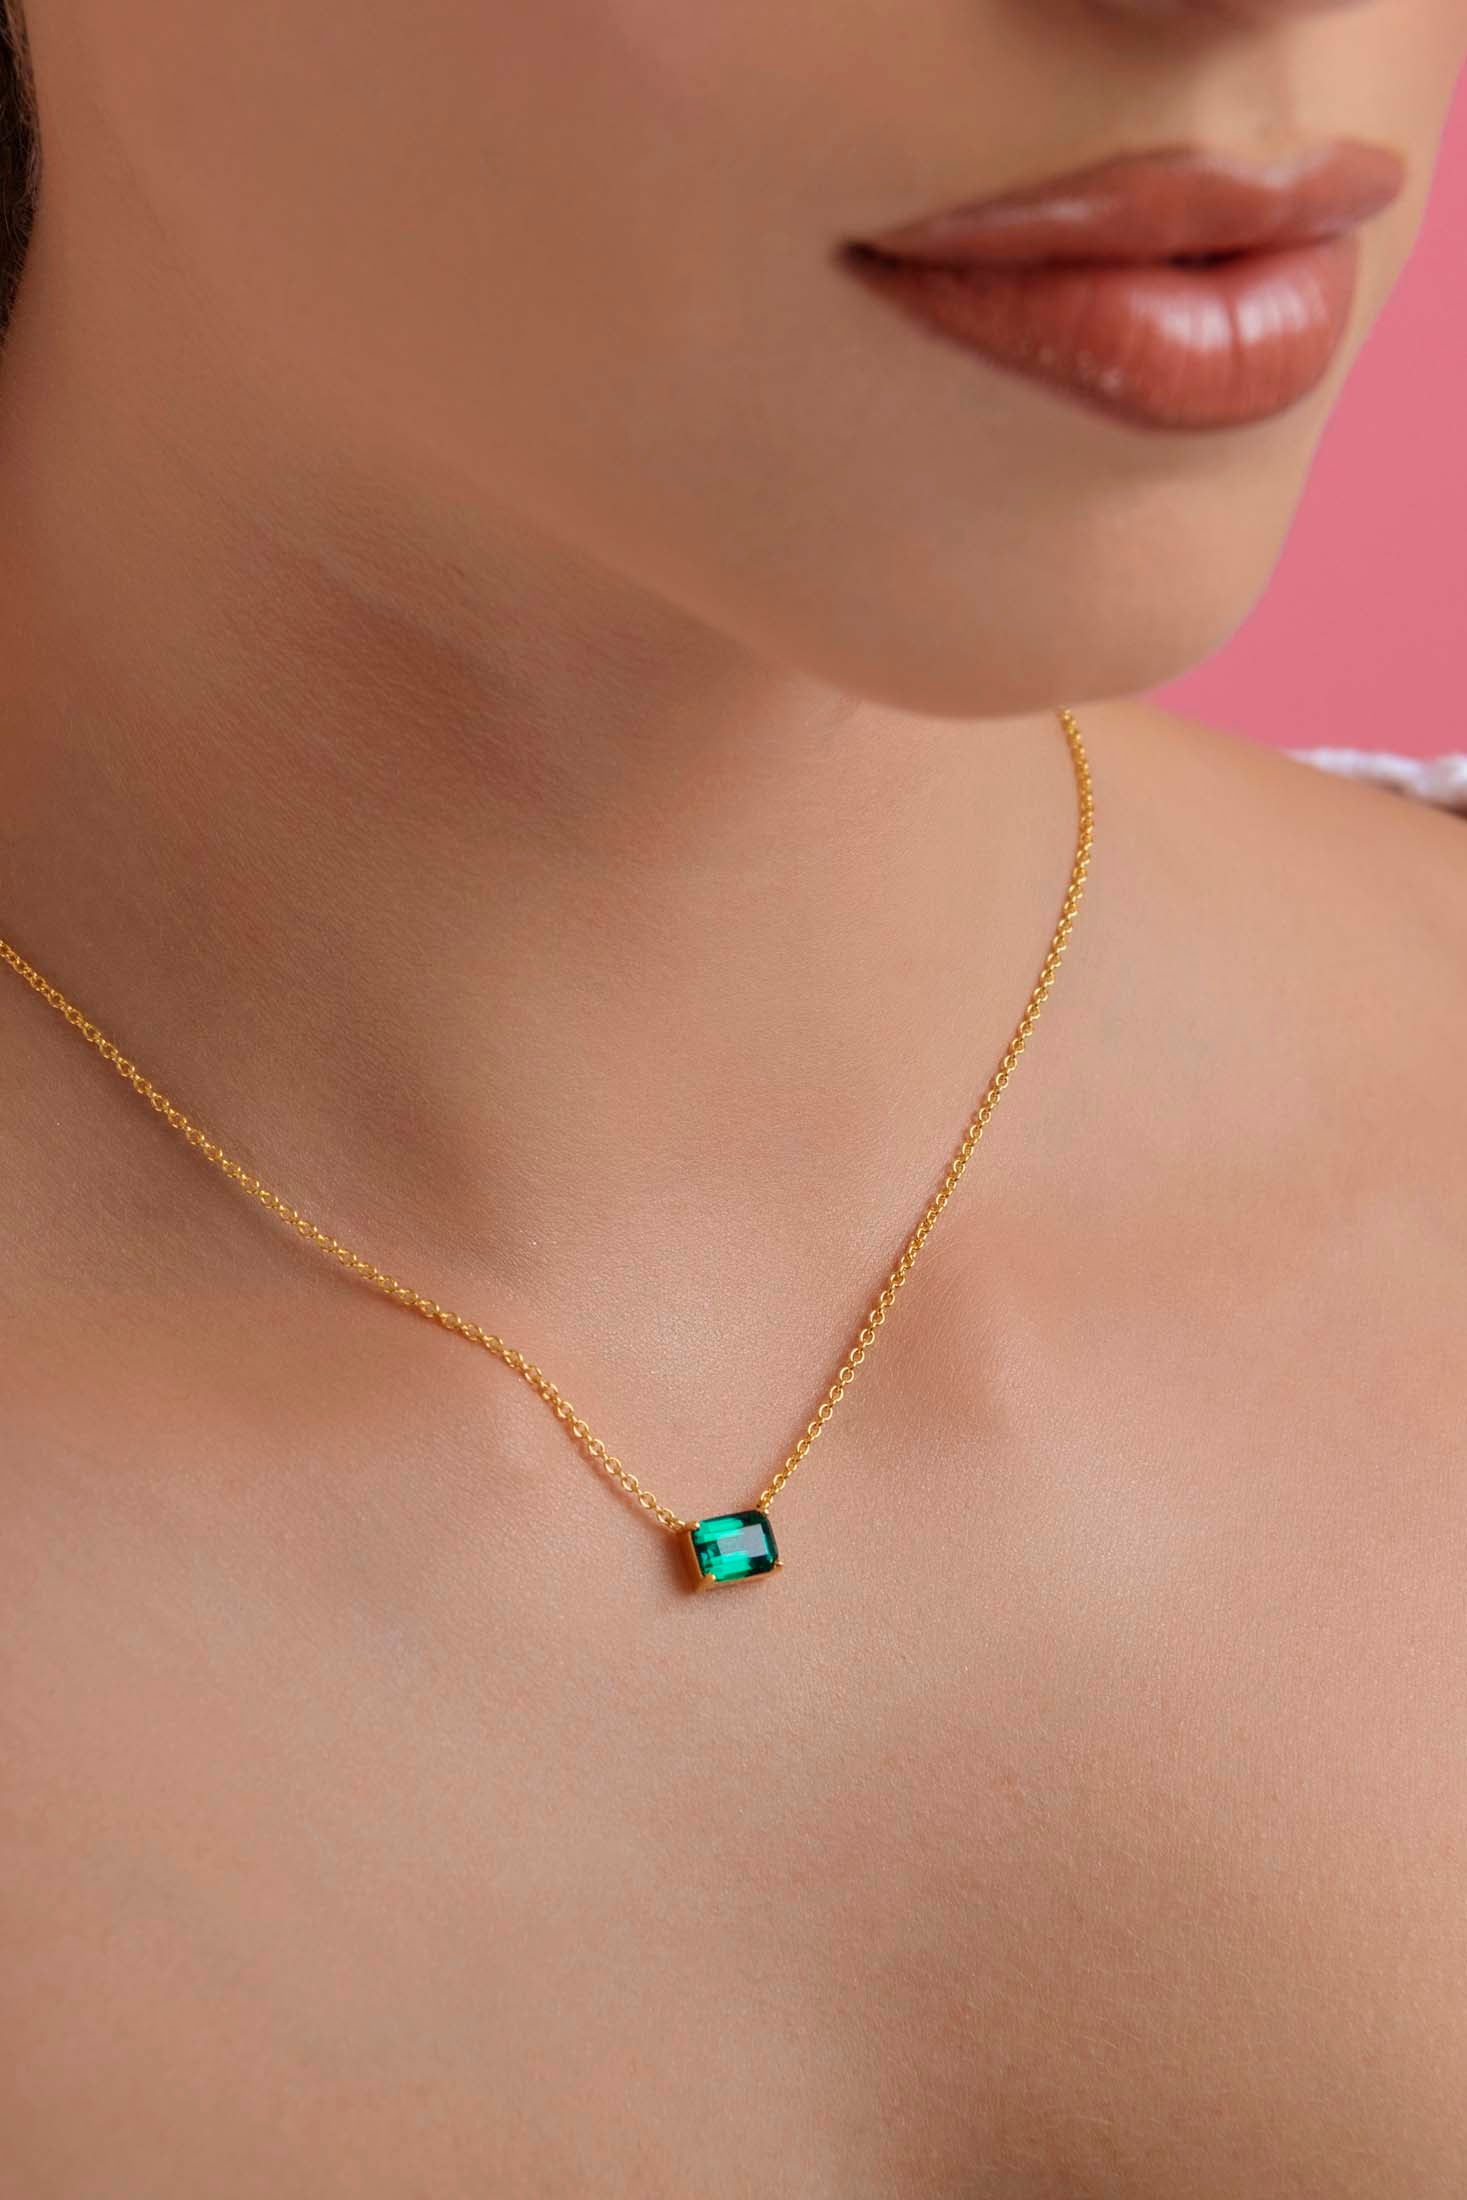 Emerald Solitaire Necklace in 18k Gold Vermeil